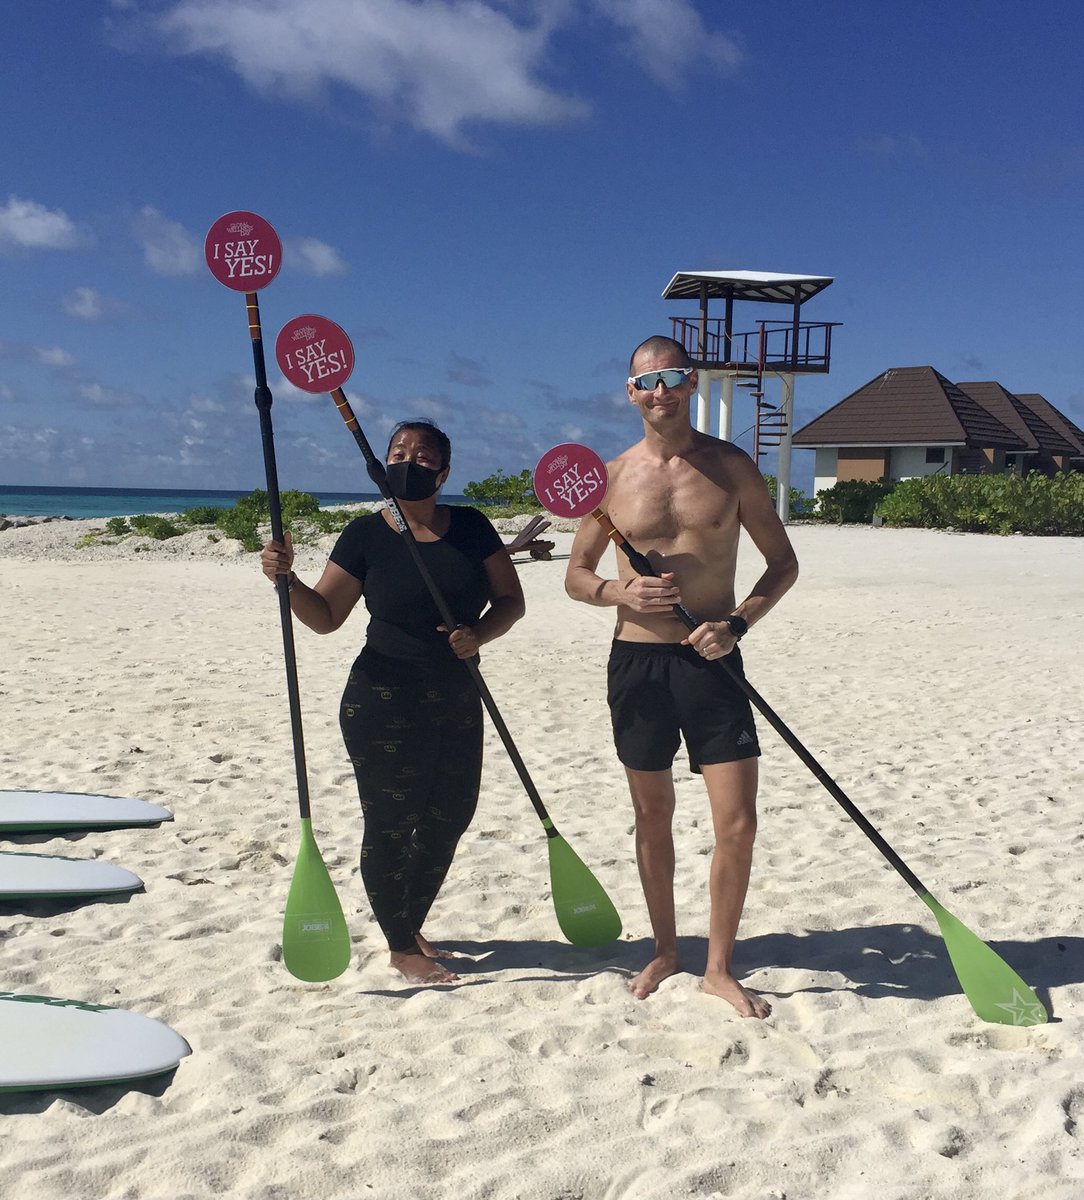 It’s Global Wellness Day 🤗

Go ahead and make some ‘Me Time’ for yourself 

#GlobalWellnessDay
#varu #maldives 
#tribrun #teamtribrun 
@Atmosphere_Core 
@GlobalWellness @globalwell4all @wellnessdaybc #mindful #Mindfulness #MentalHealthMatters